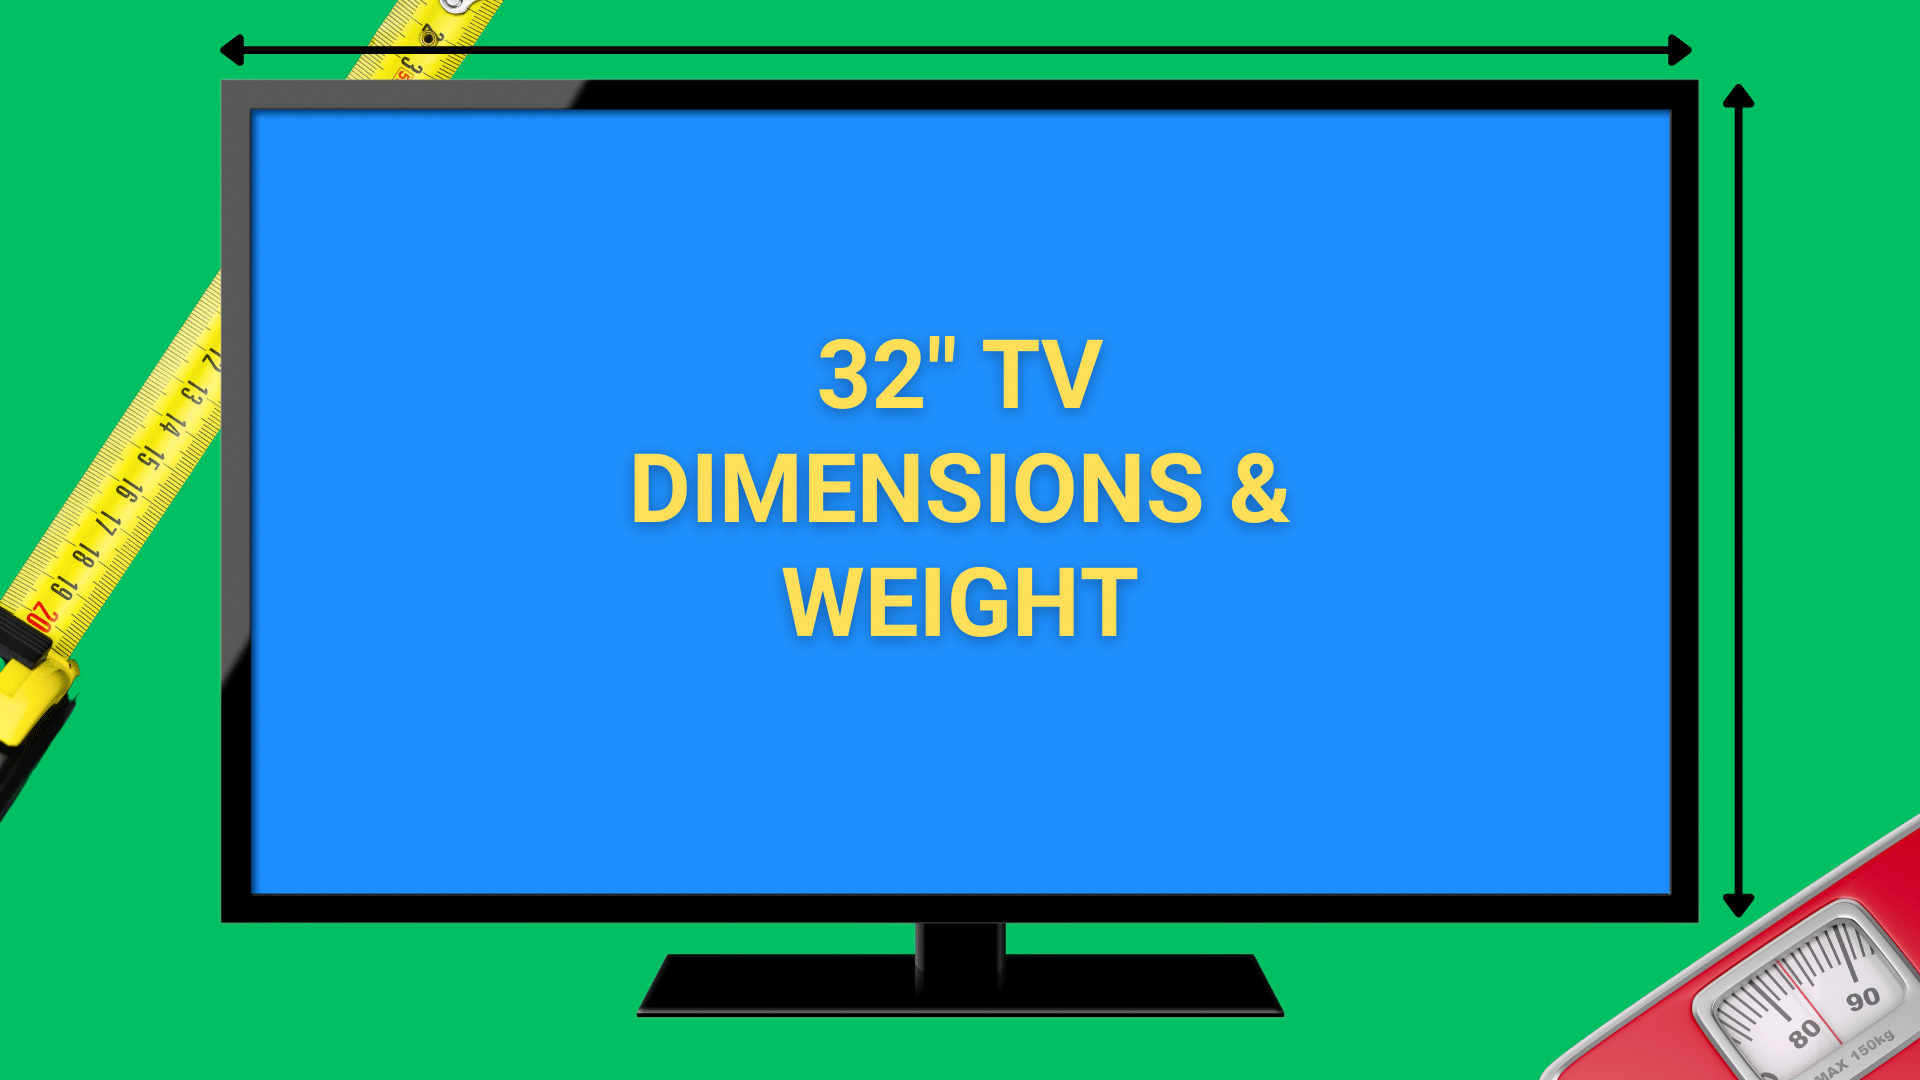 Image of 32 inch TV with measuring tape and bath scale in background.